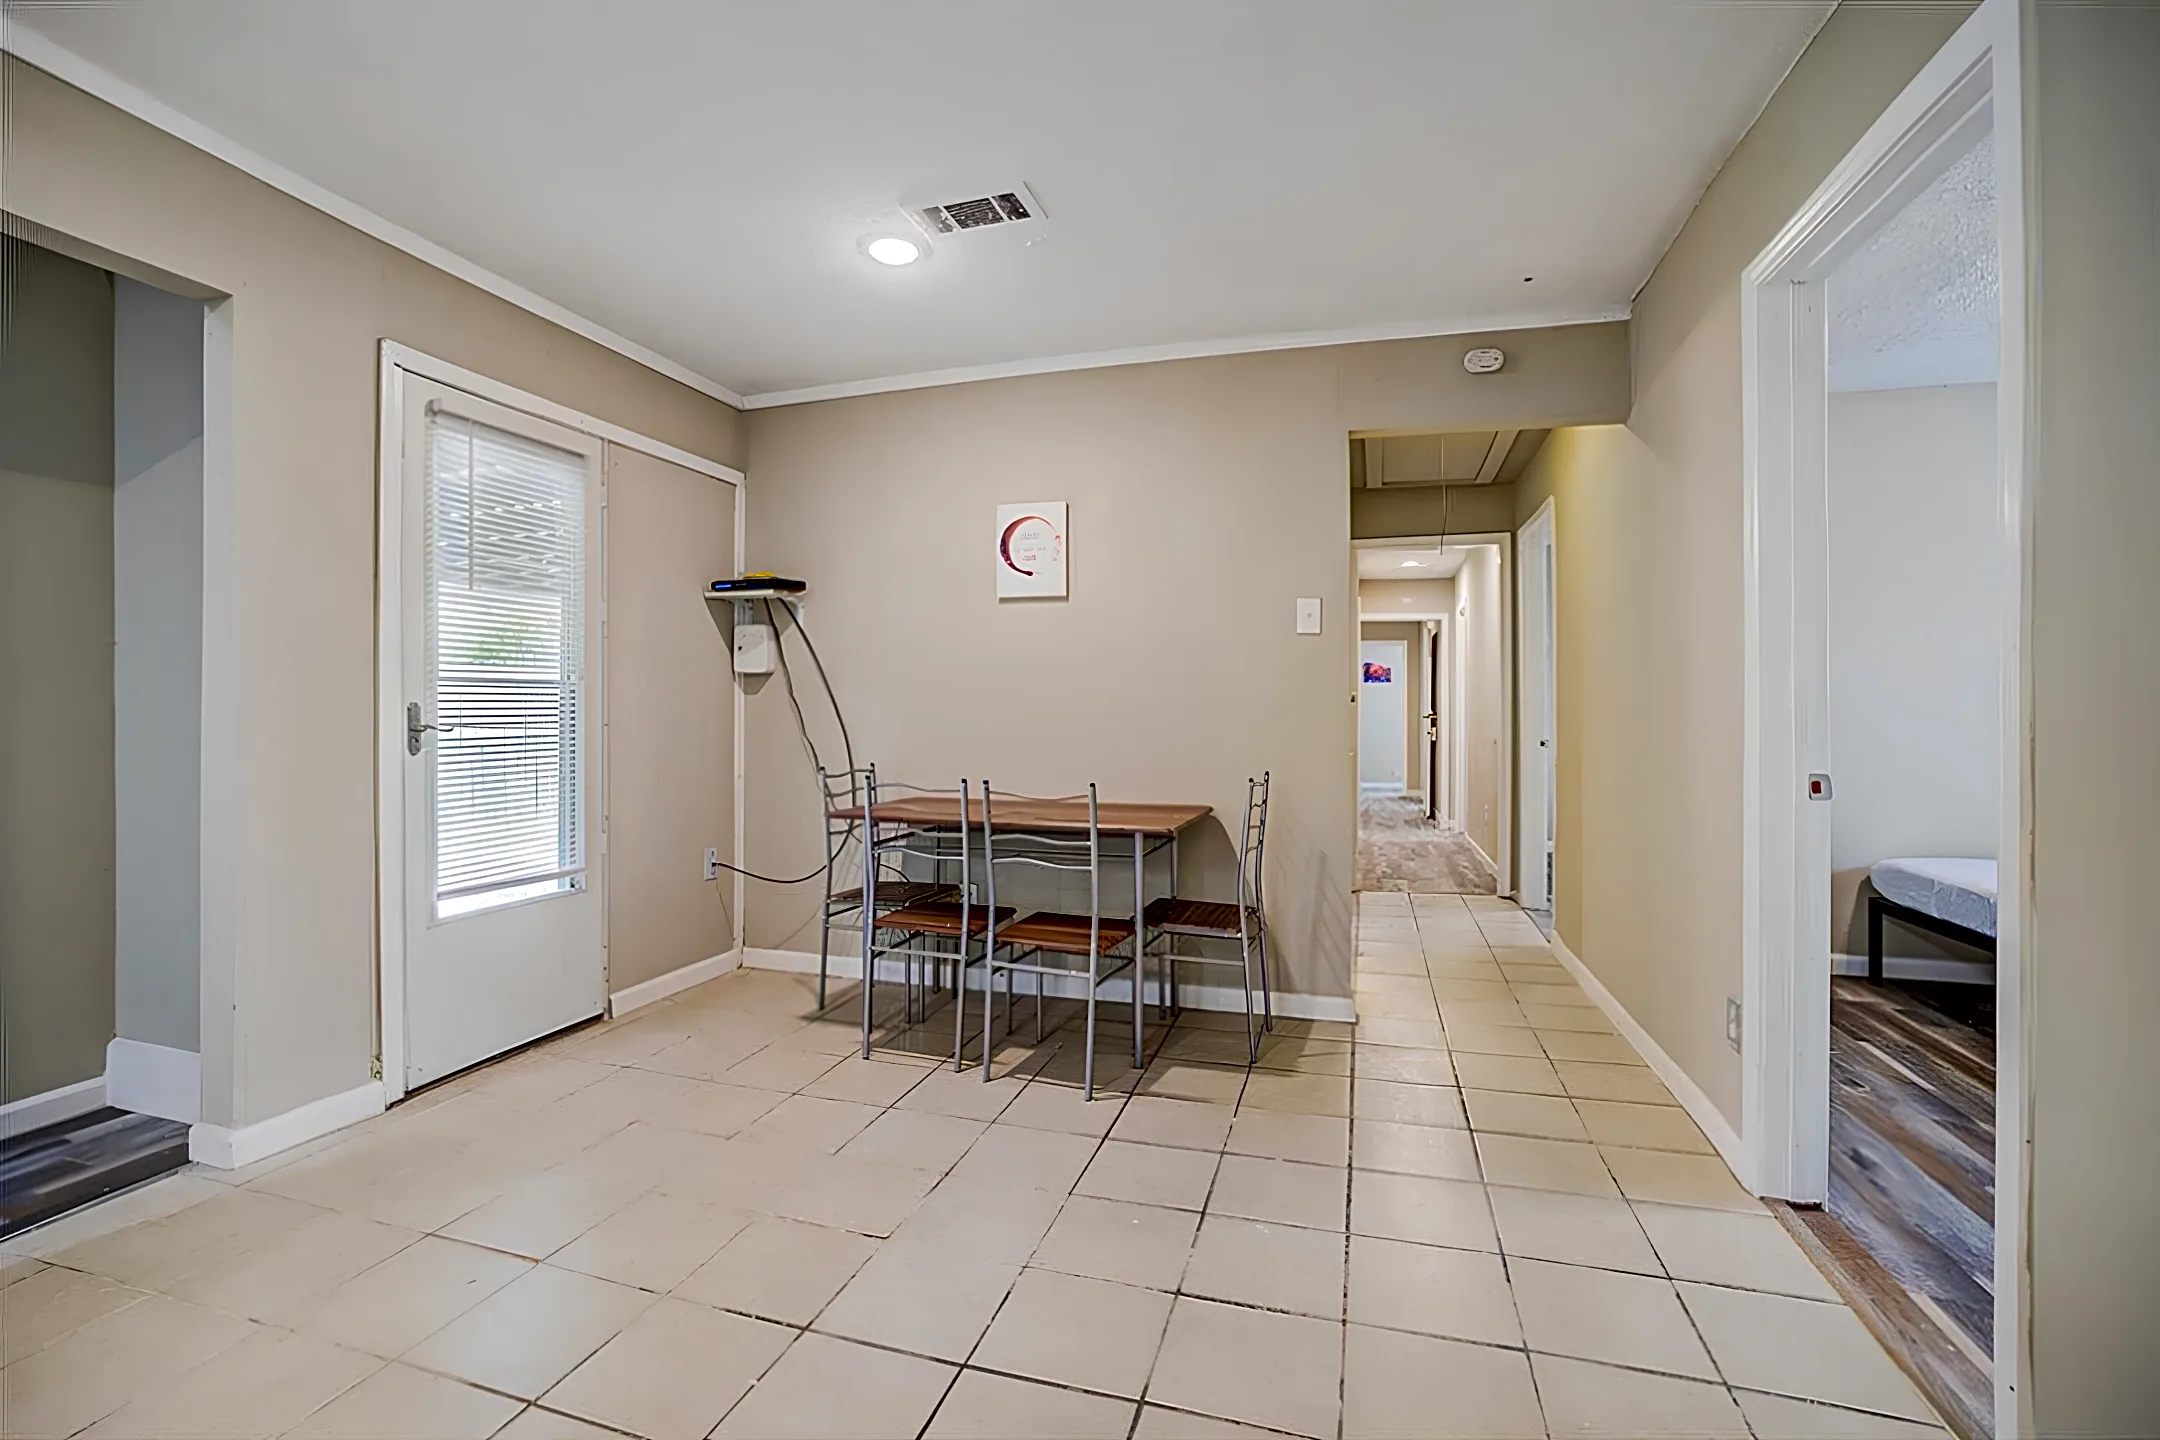 Dining Room - Room For Rent - Houston, TX